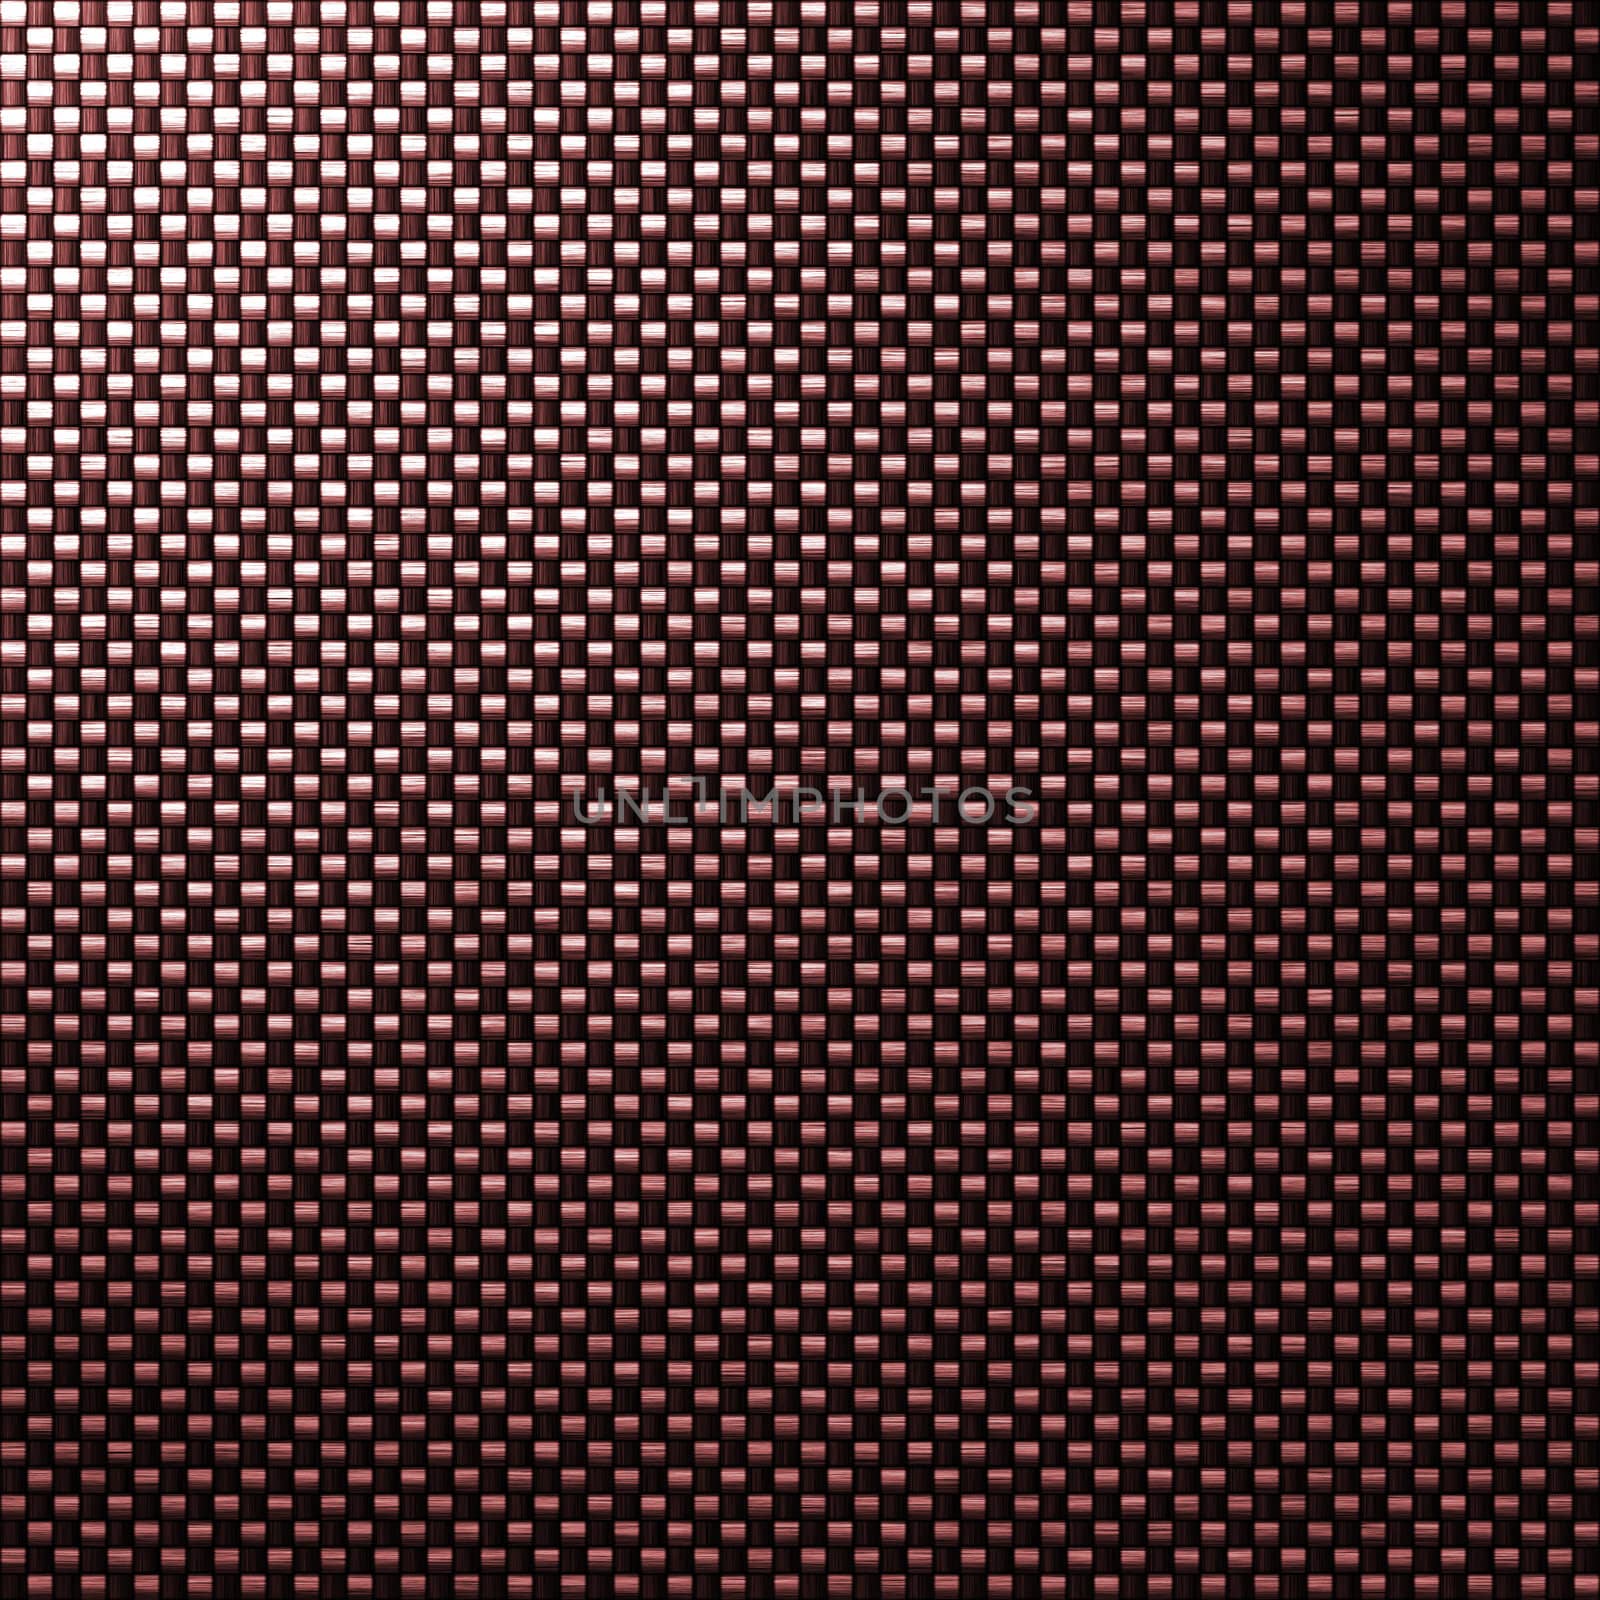 detailed tightly woven carbon fibre background texture